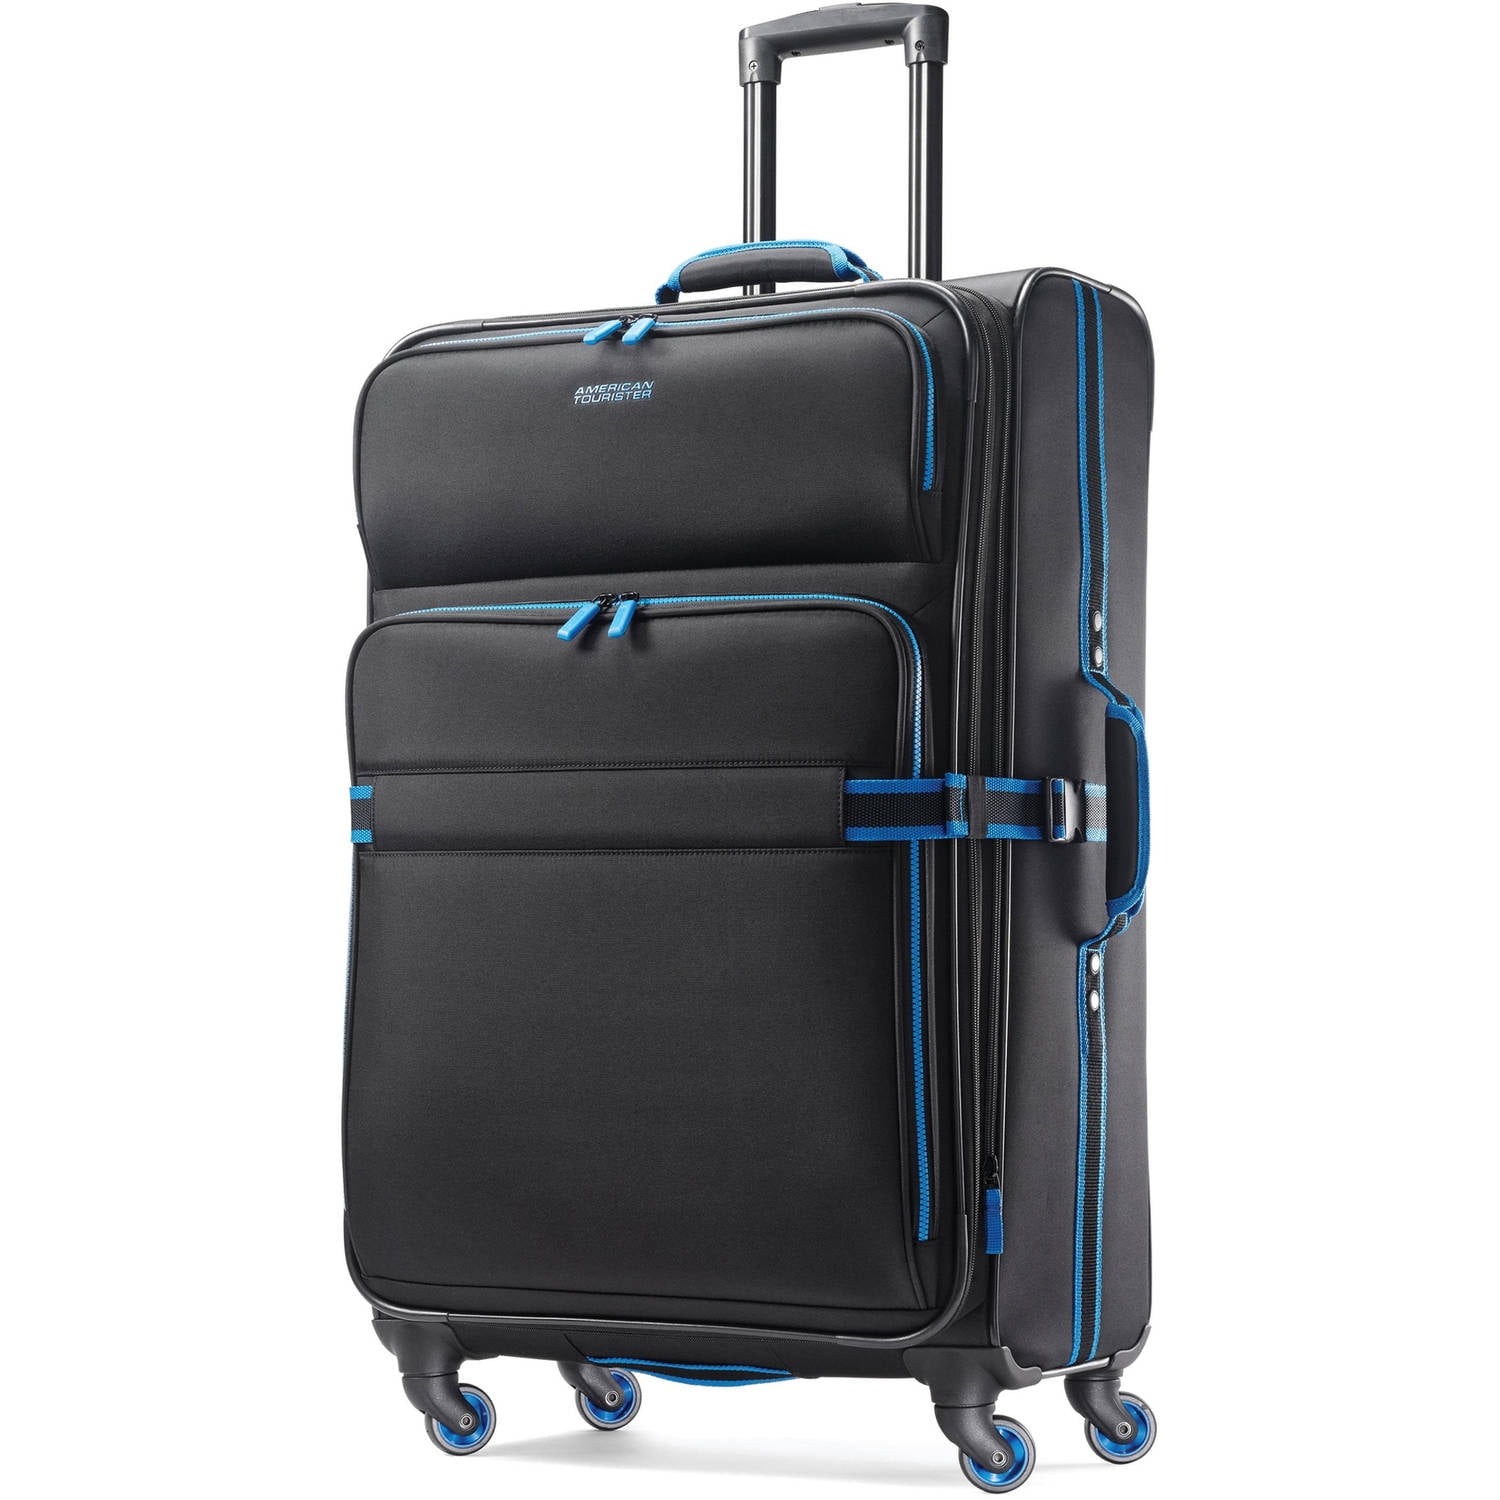 American Tourister Exo Eclipse 29" Softside Spinner Luggage - Walmart.com